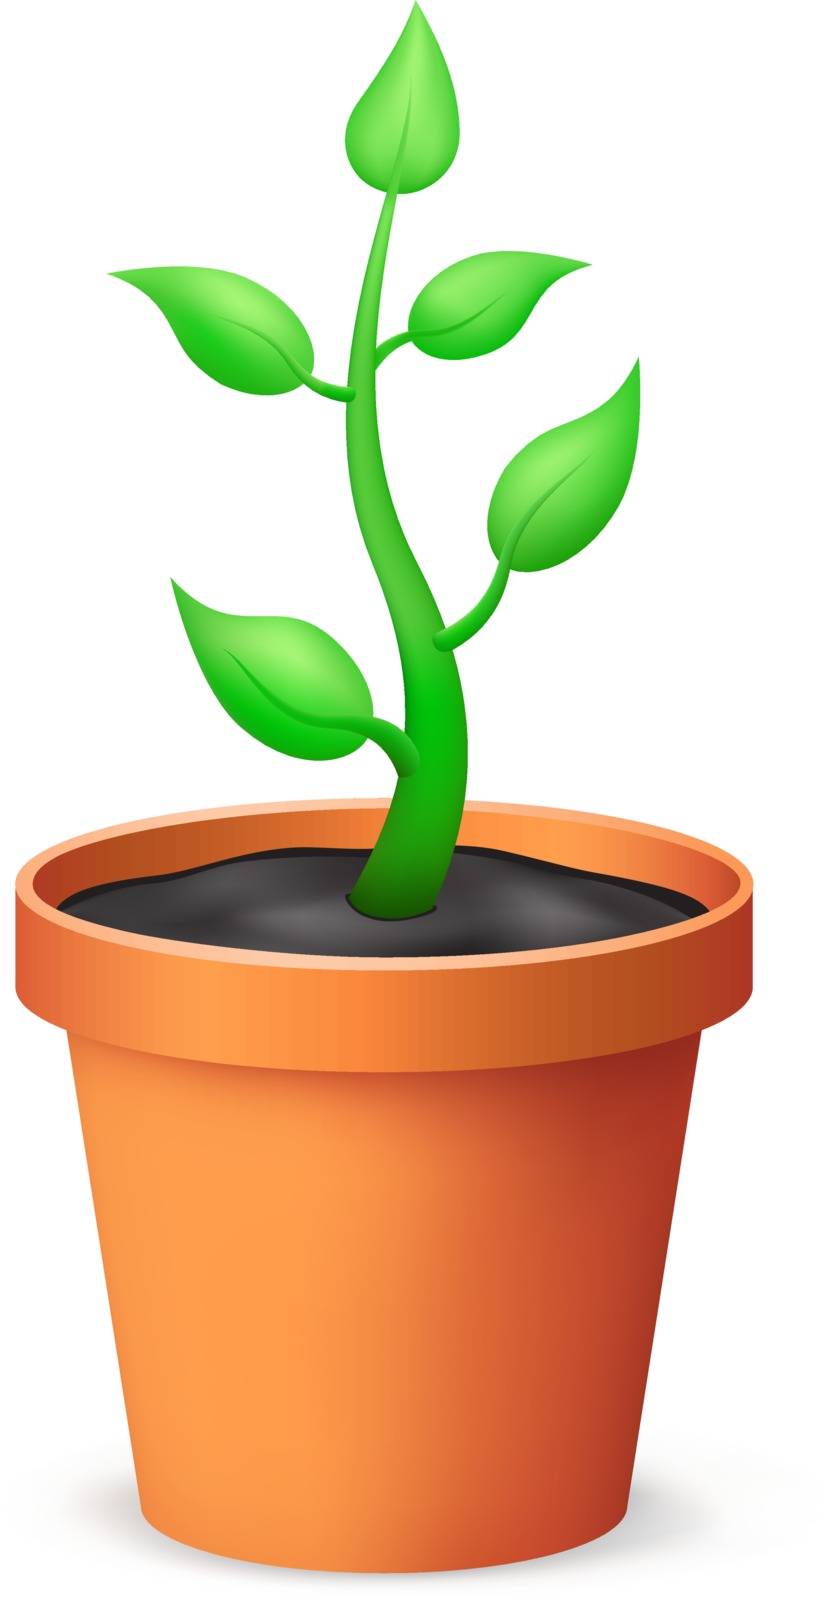 The flowerpot and growing plant on the white background